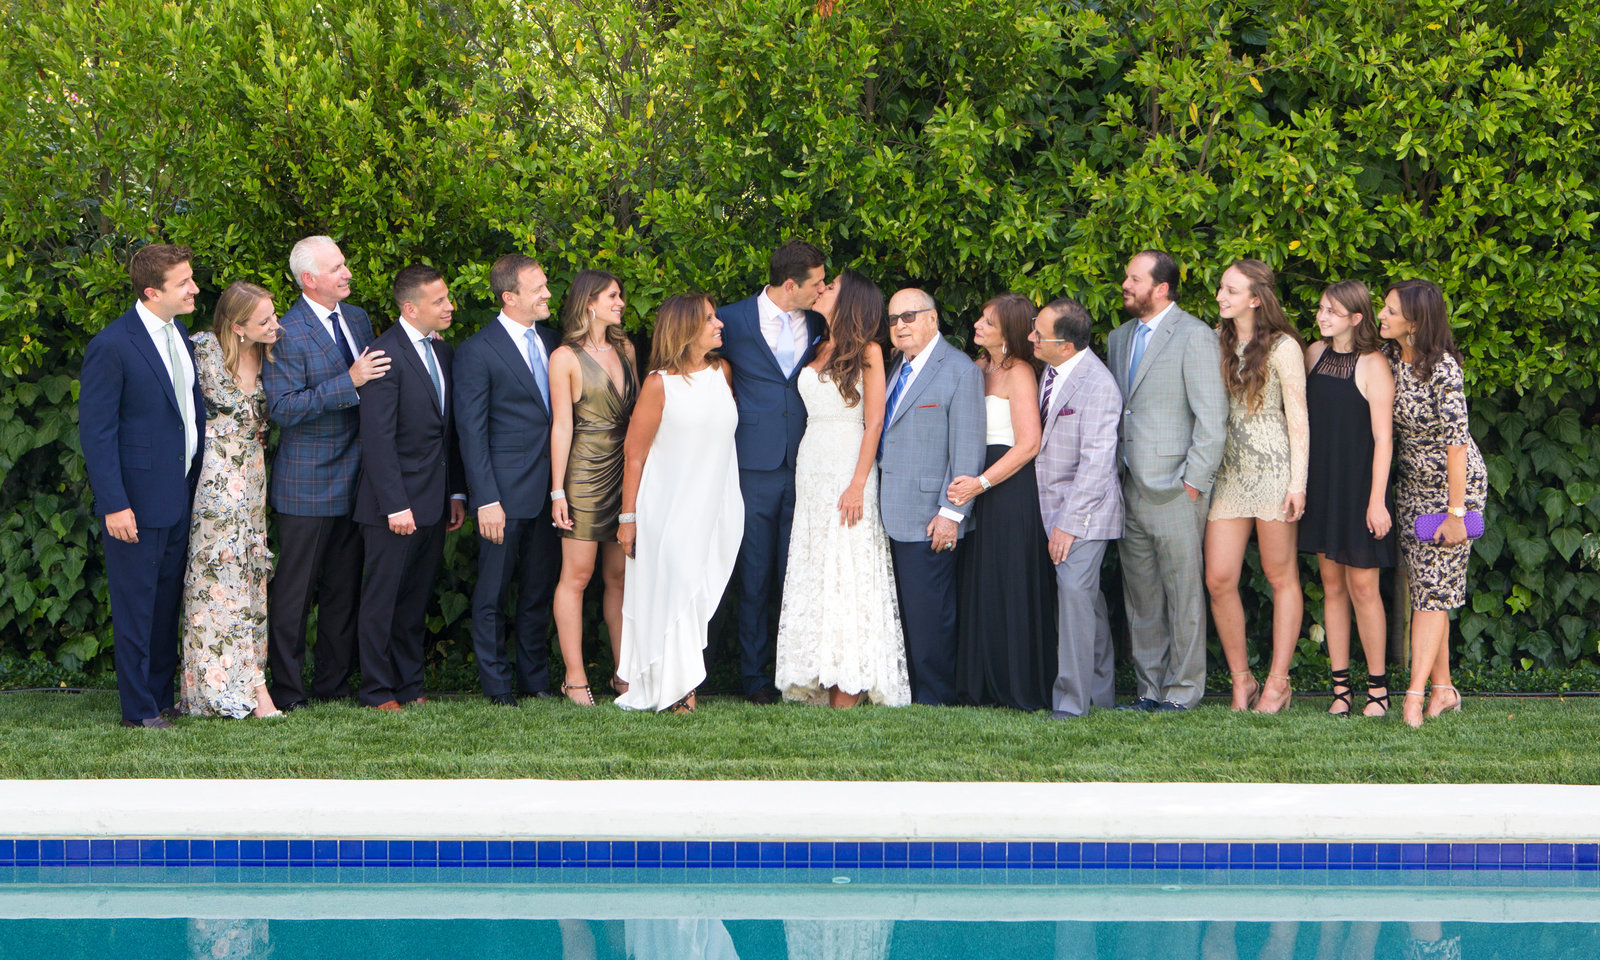 Overlooking a gorgeous pool, the bride and groom pose with their family members